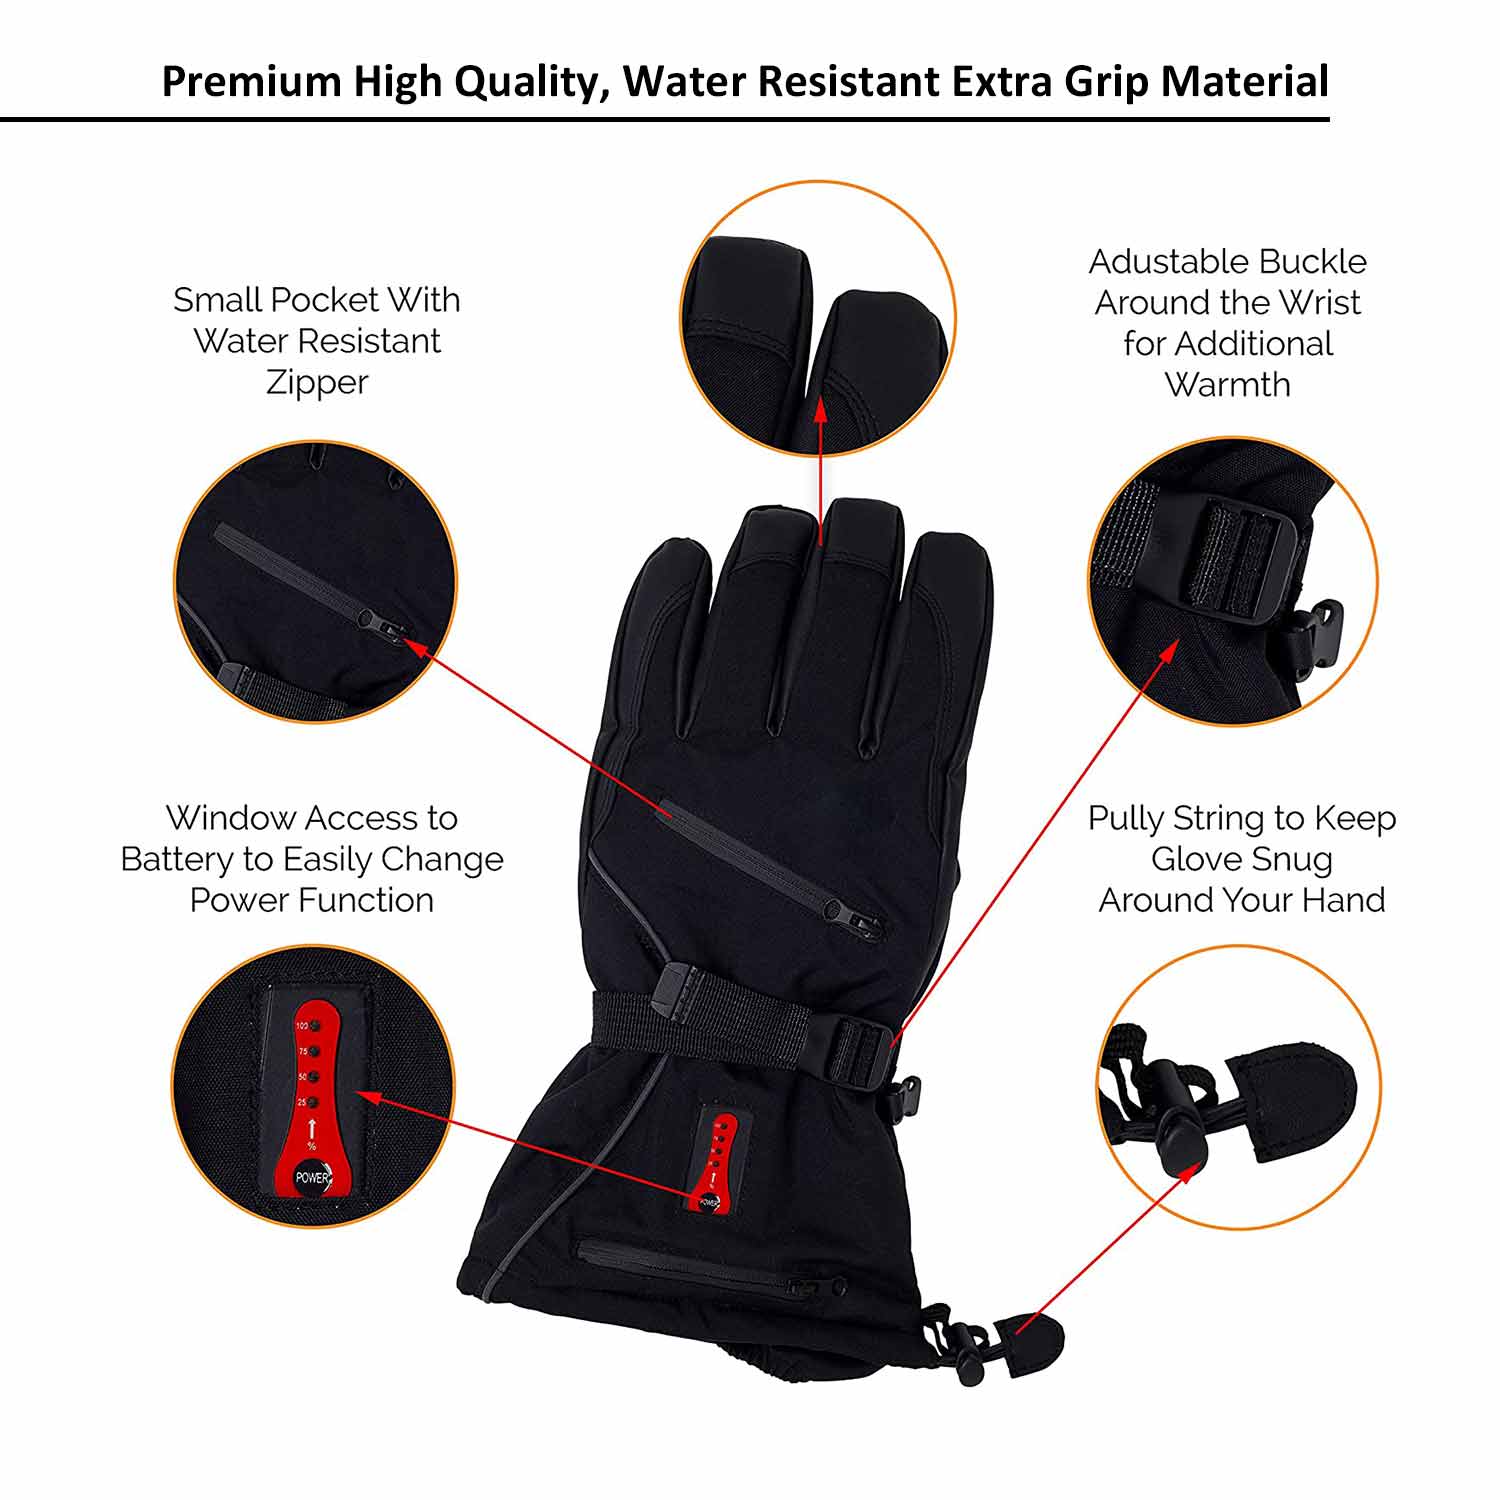 Smart Lithium Battery heated gloves